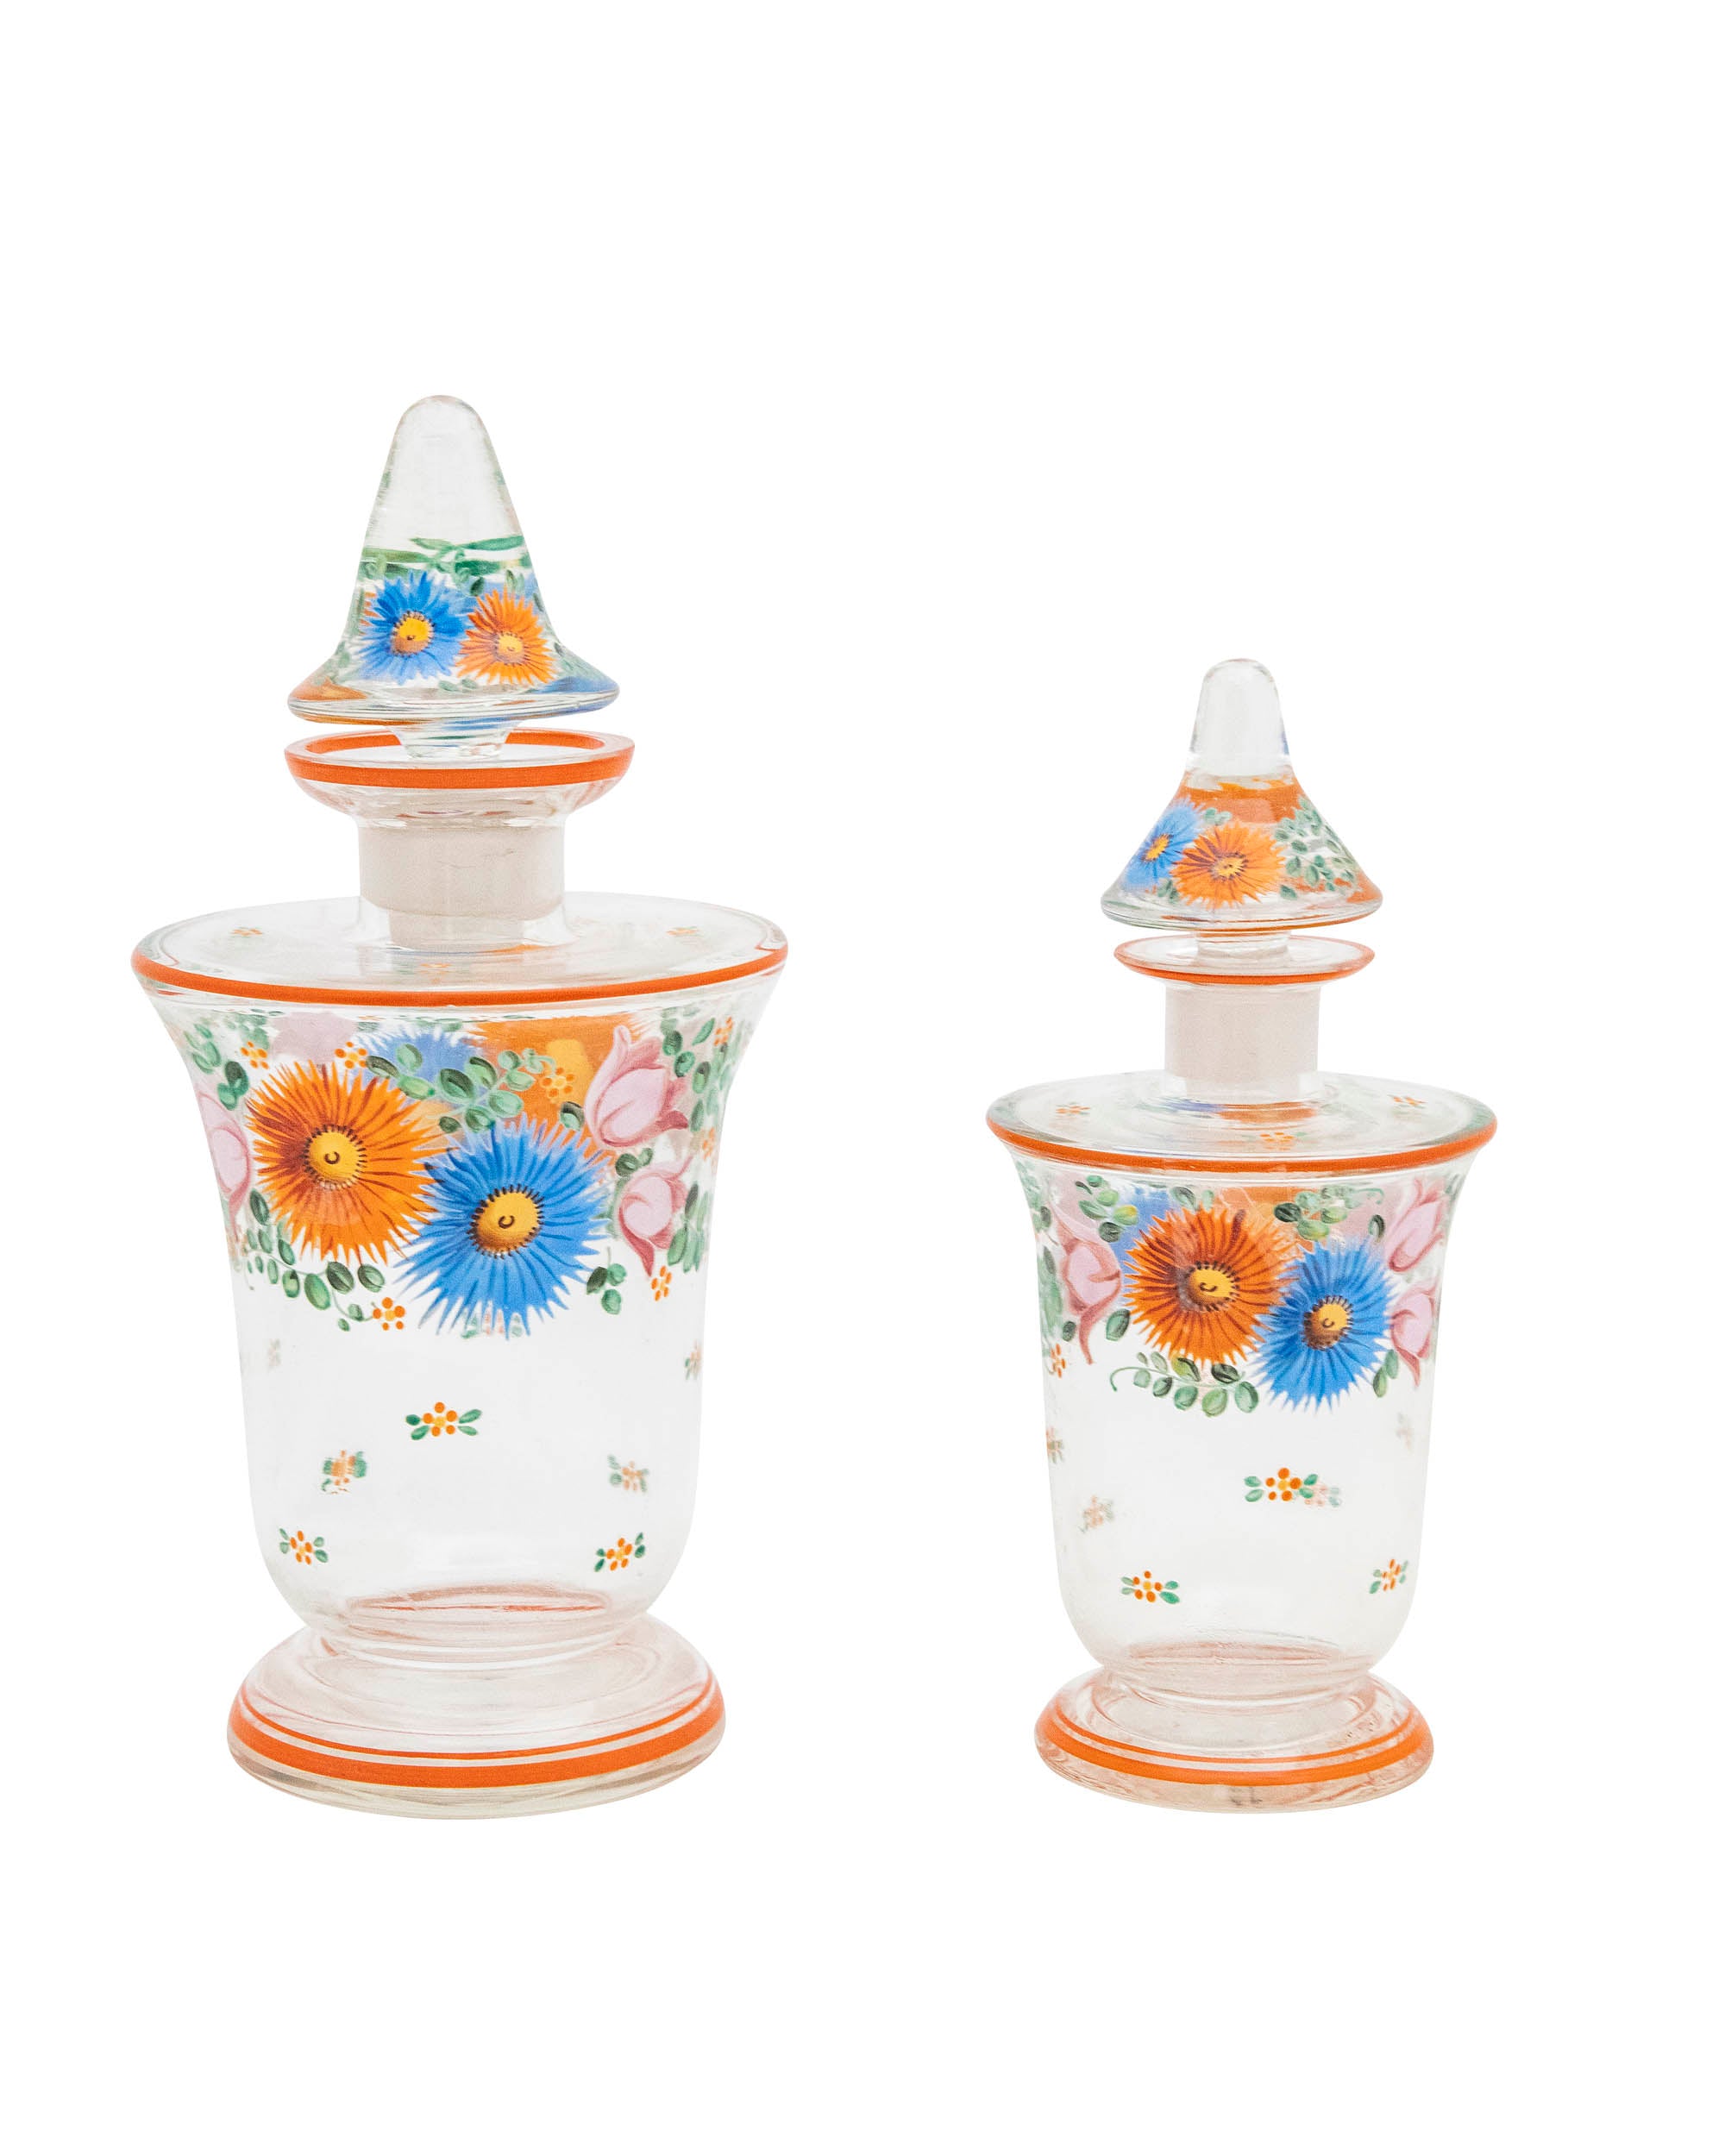 Pair of glass jars with painted flowers